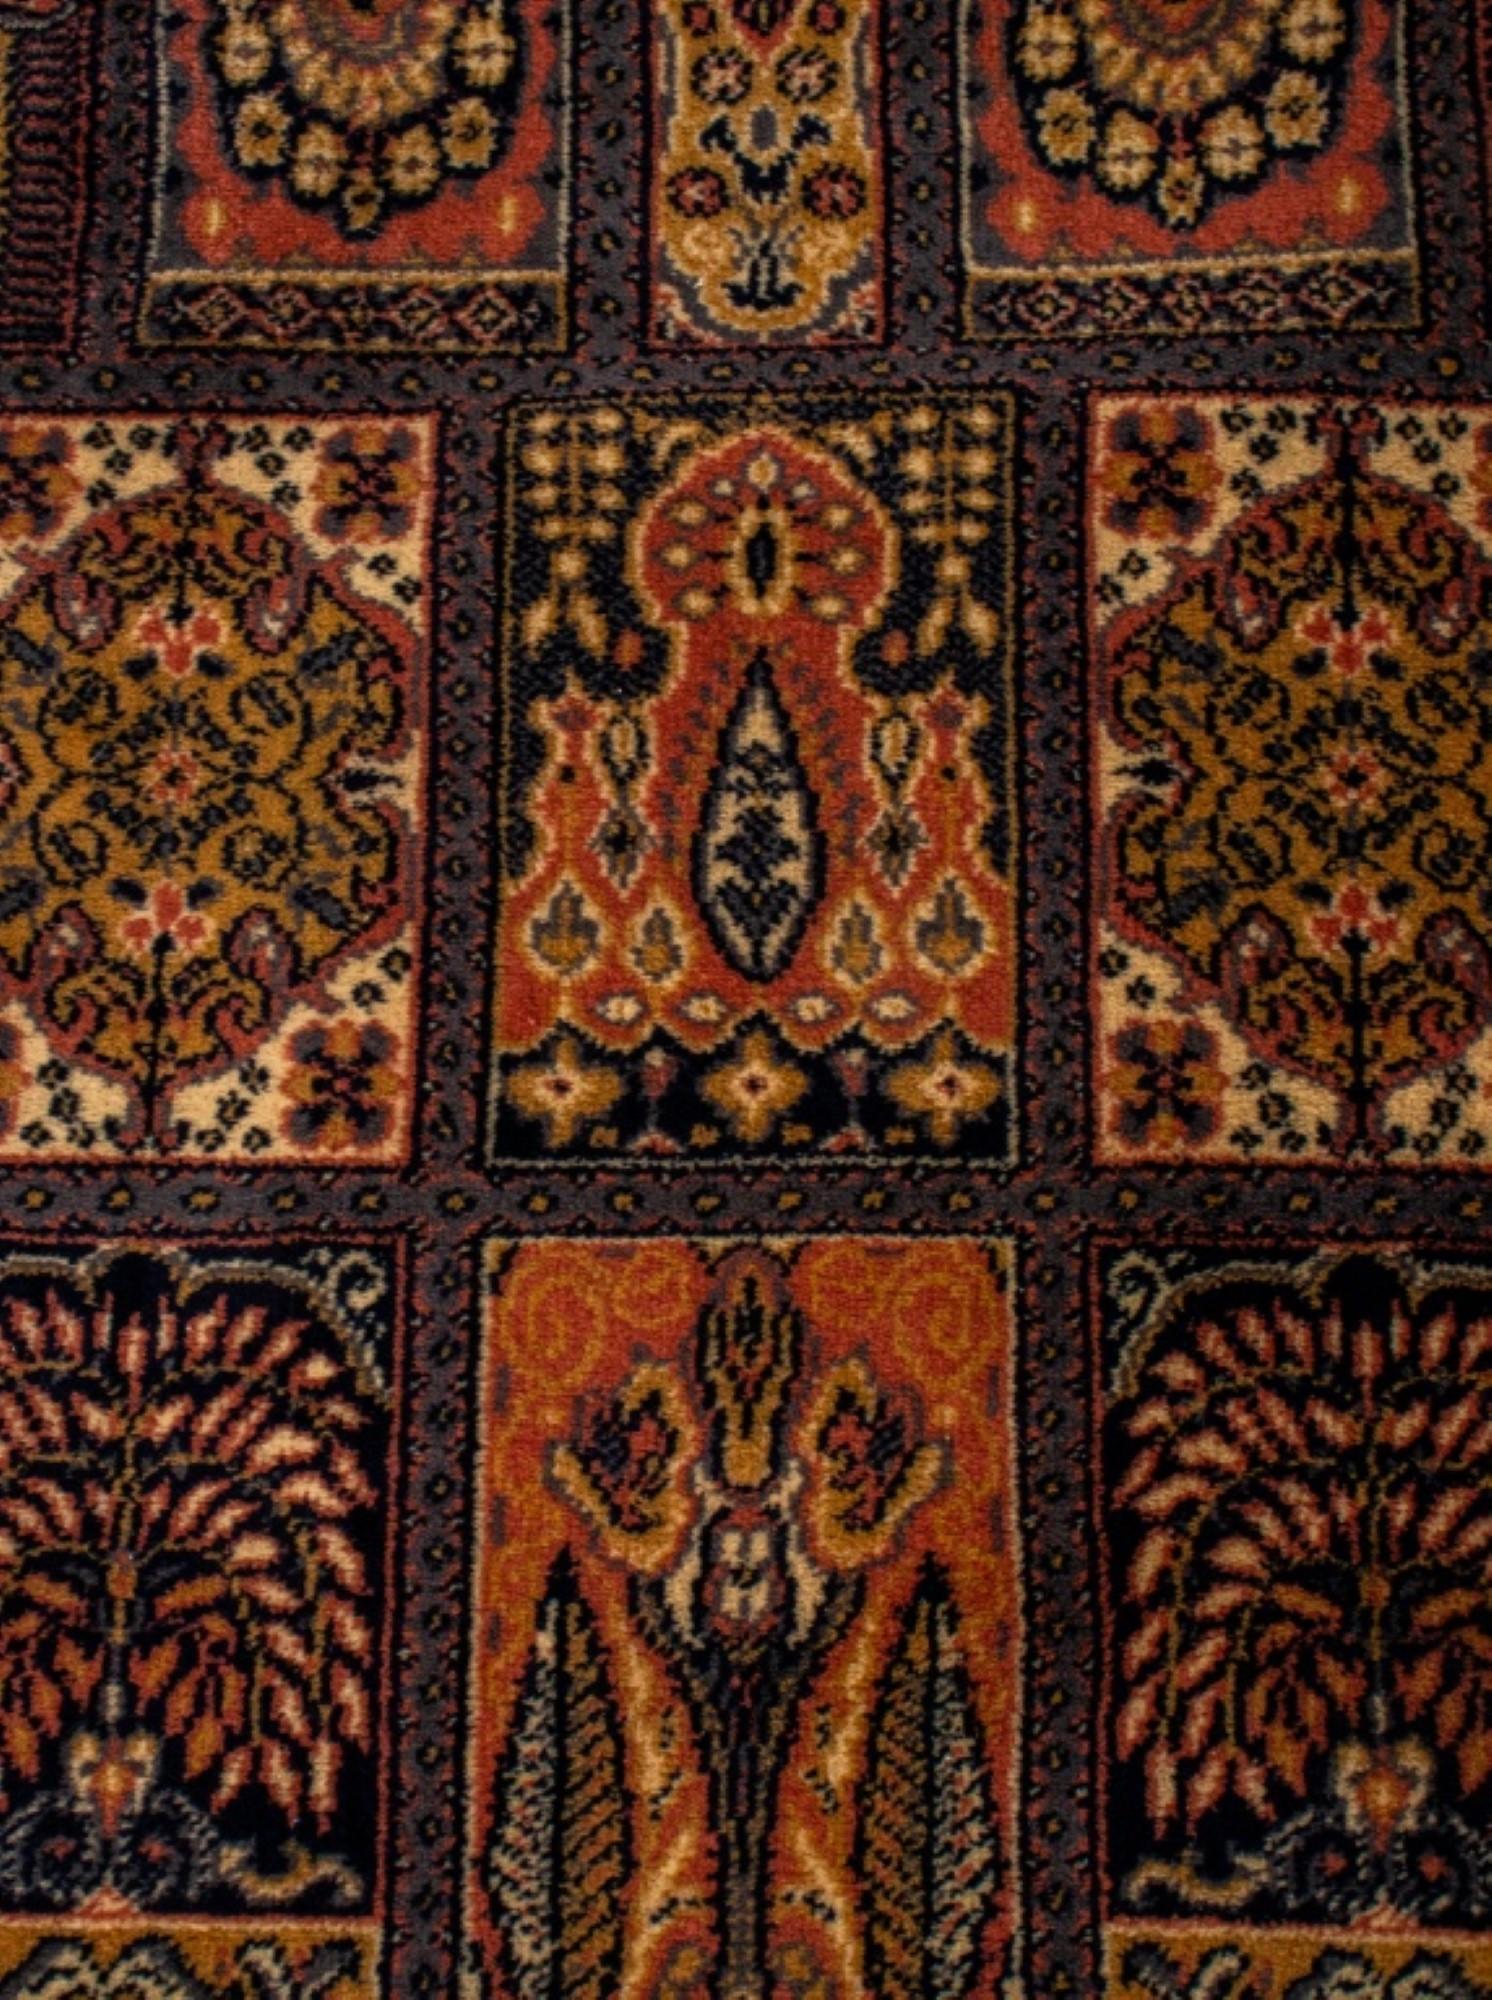 Persian carpet with dominate brown tones, the  field geometrically divided and depicting  stylized flora and fauna. 
Dimensions 
6' 1